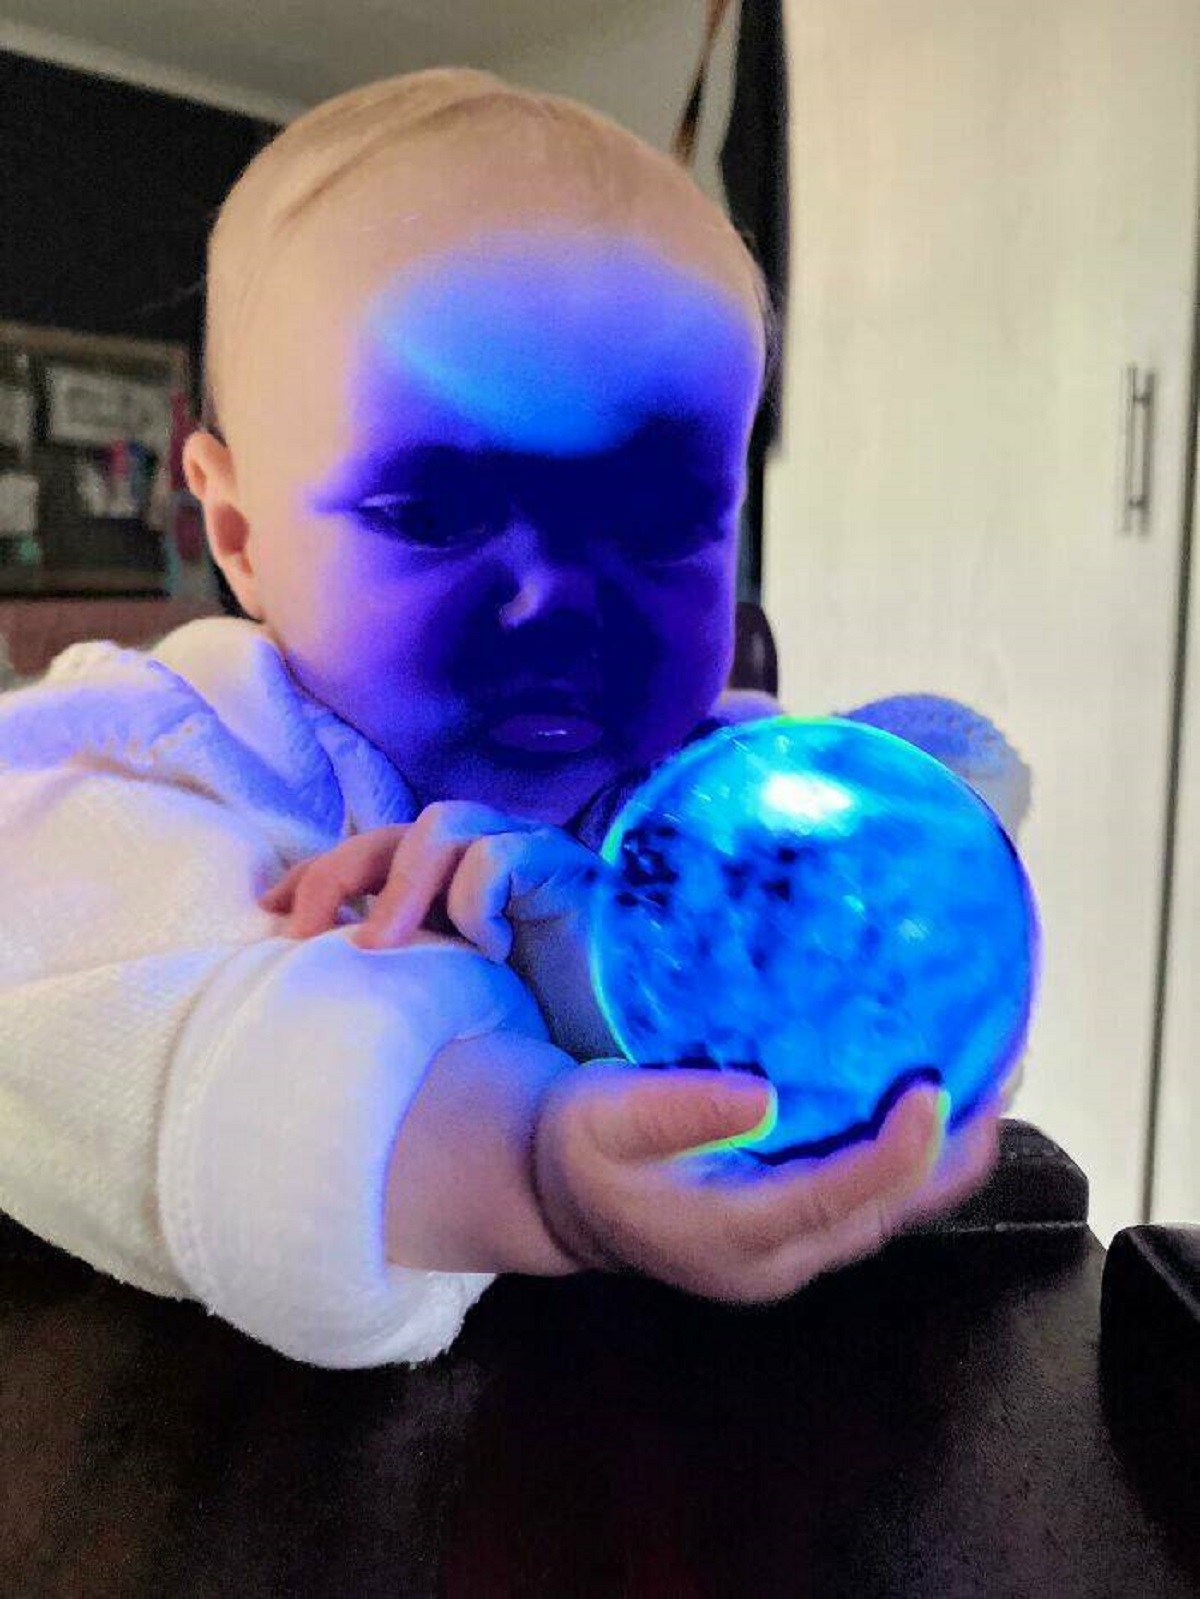 "Took A Photo Of My Baby Playing With A Light Up Ball. No Filters"